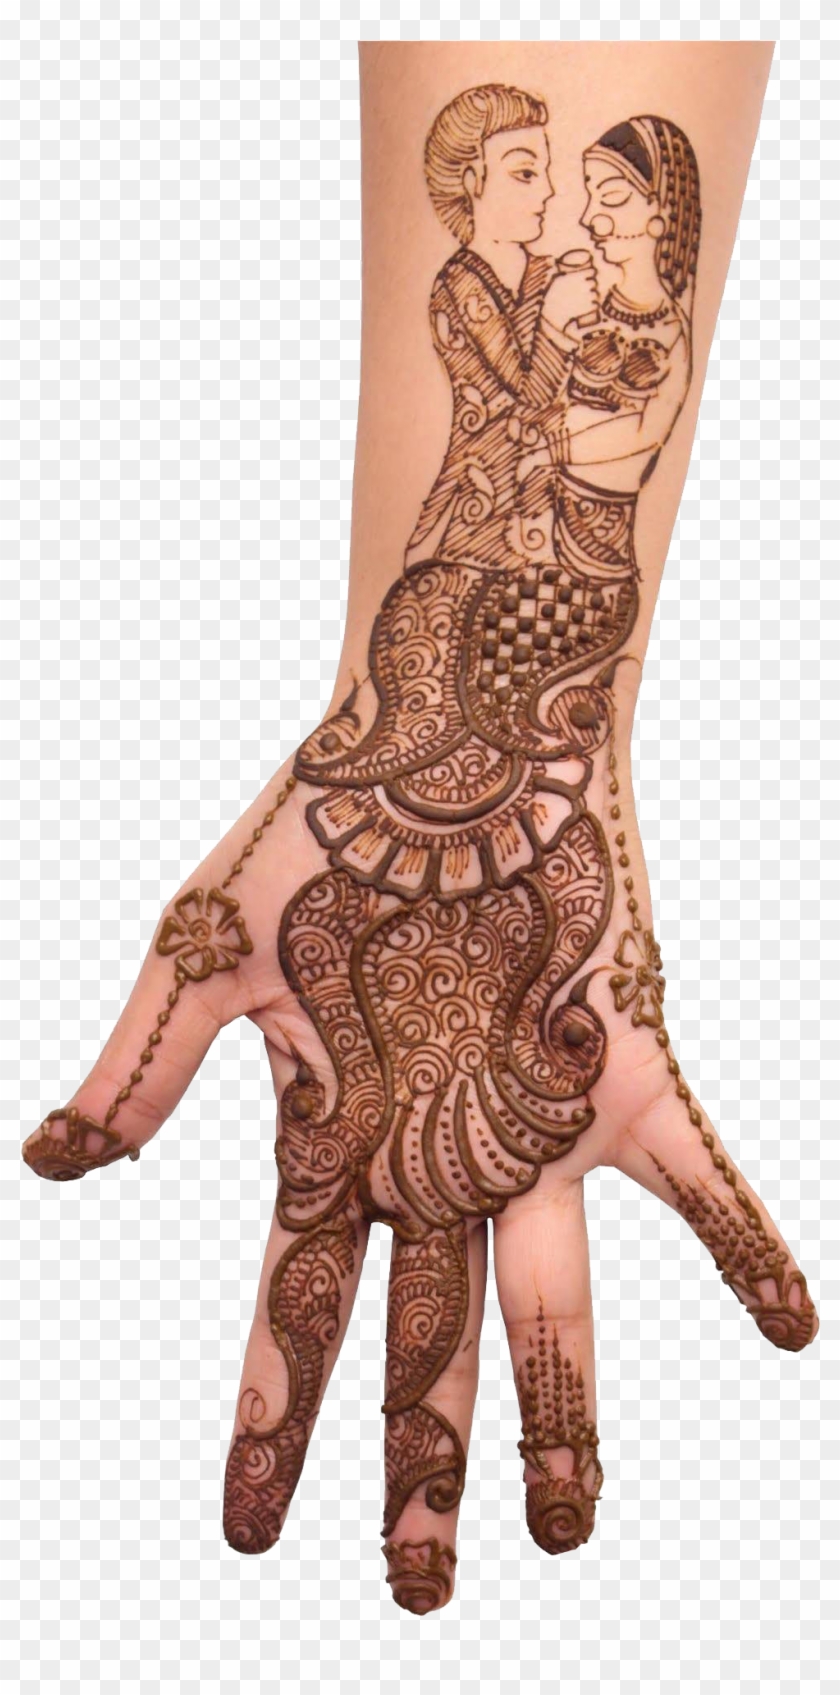 Latest Mehndi Designs For Karva Chauth, HD Png Download - 1080x1920 ...